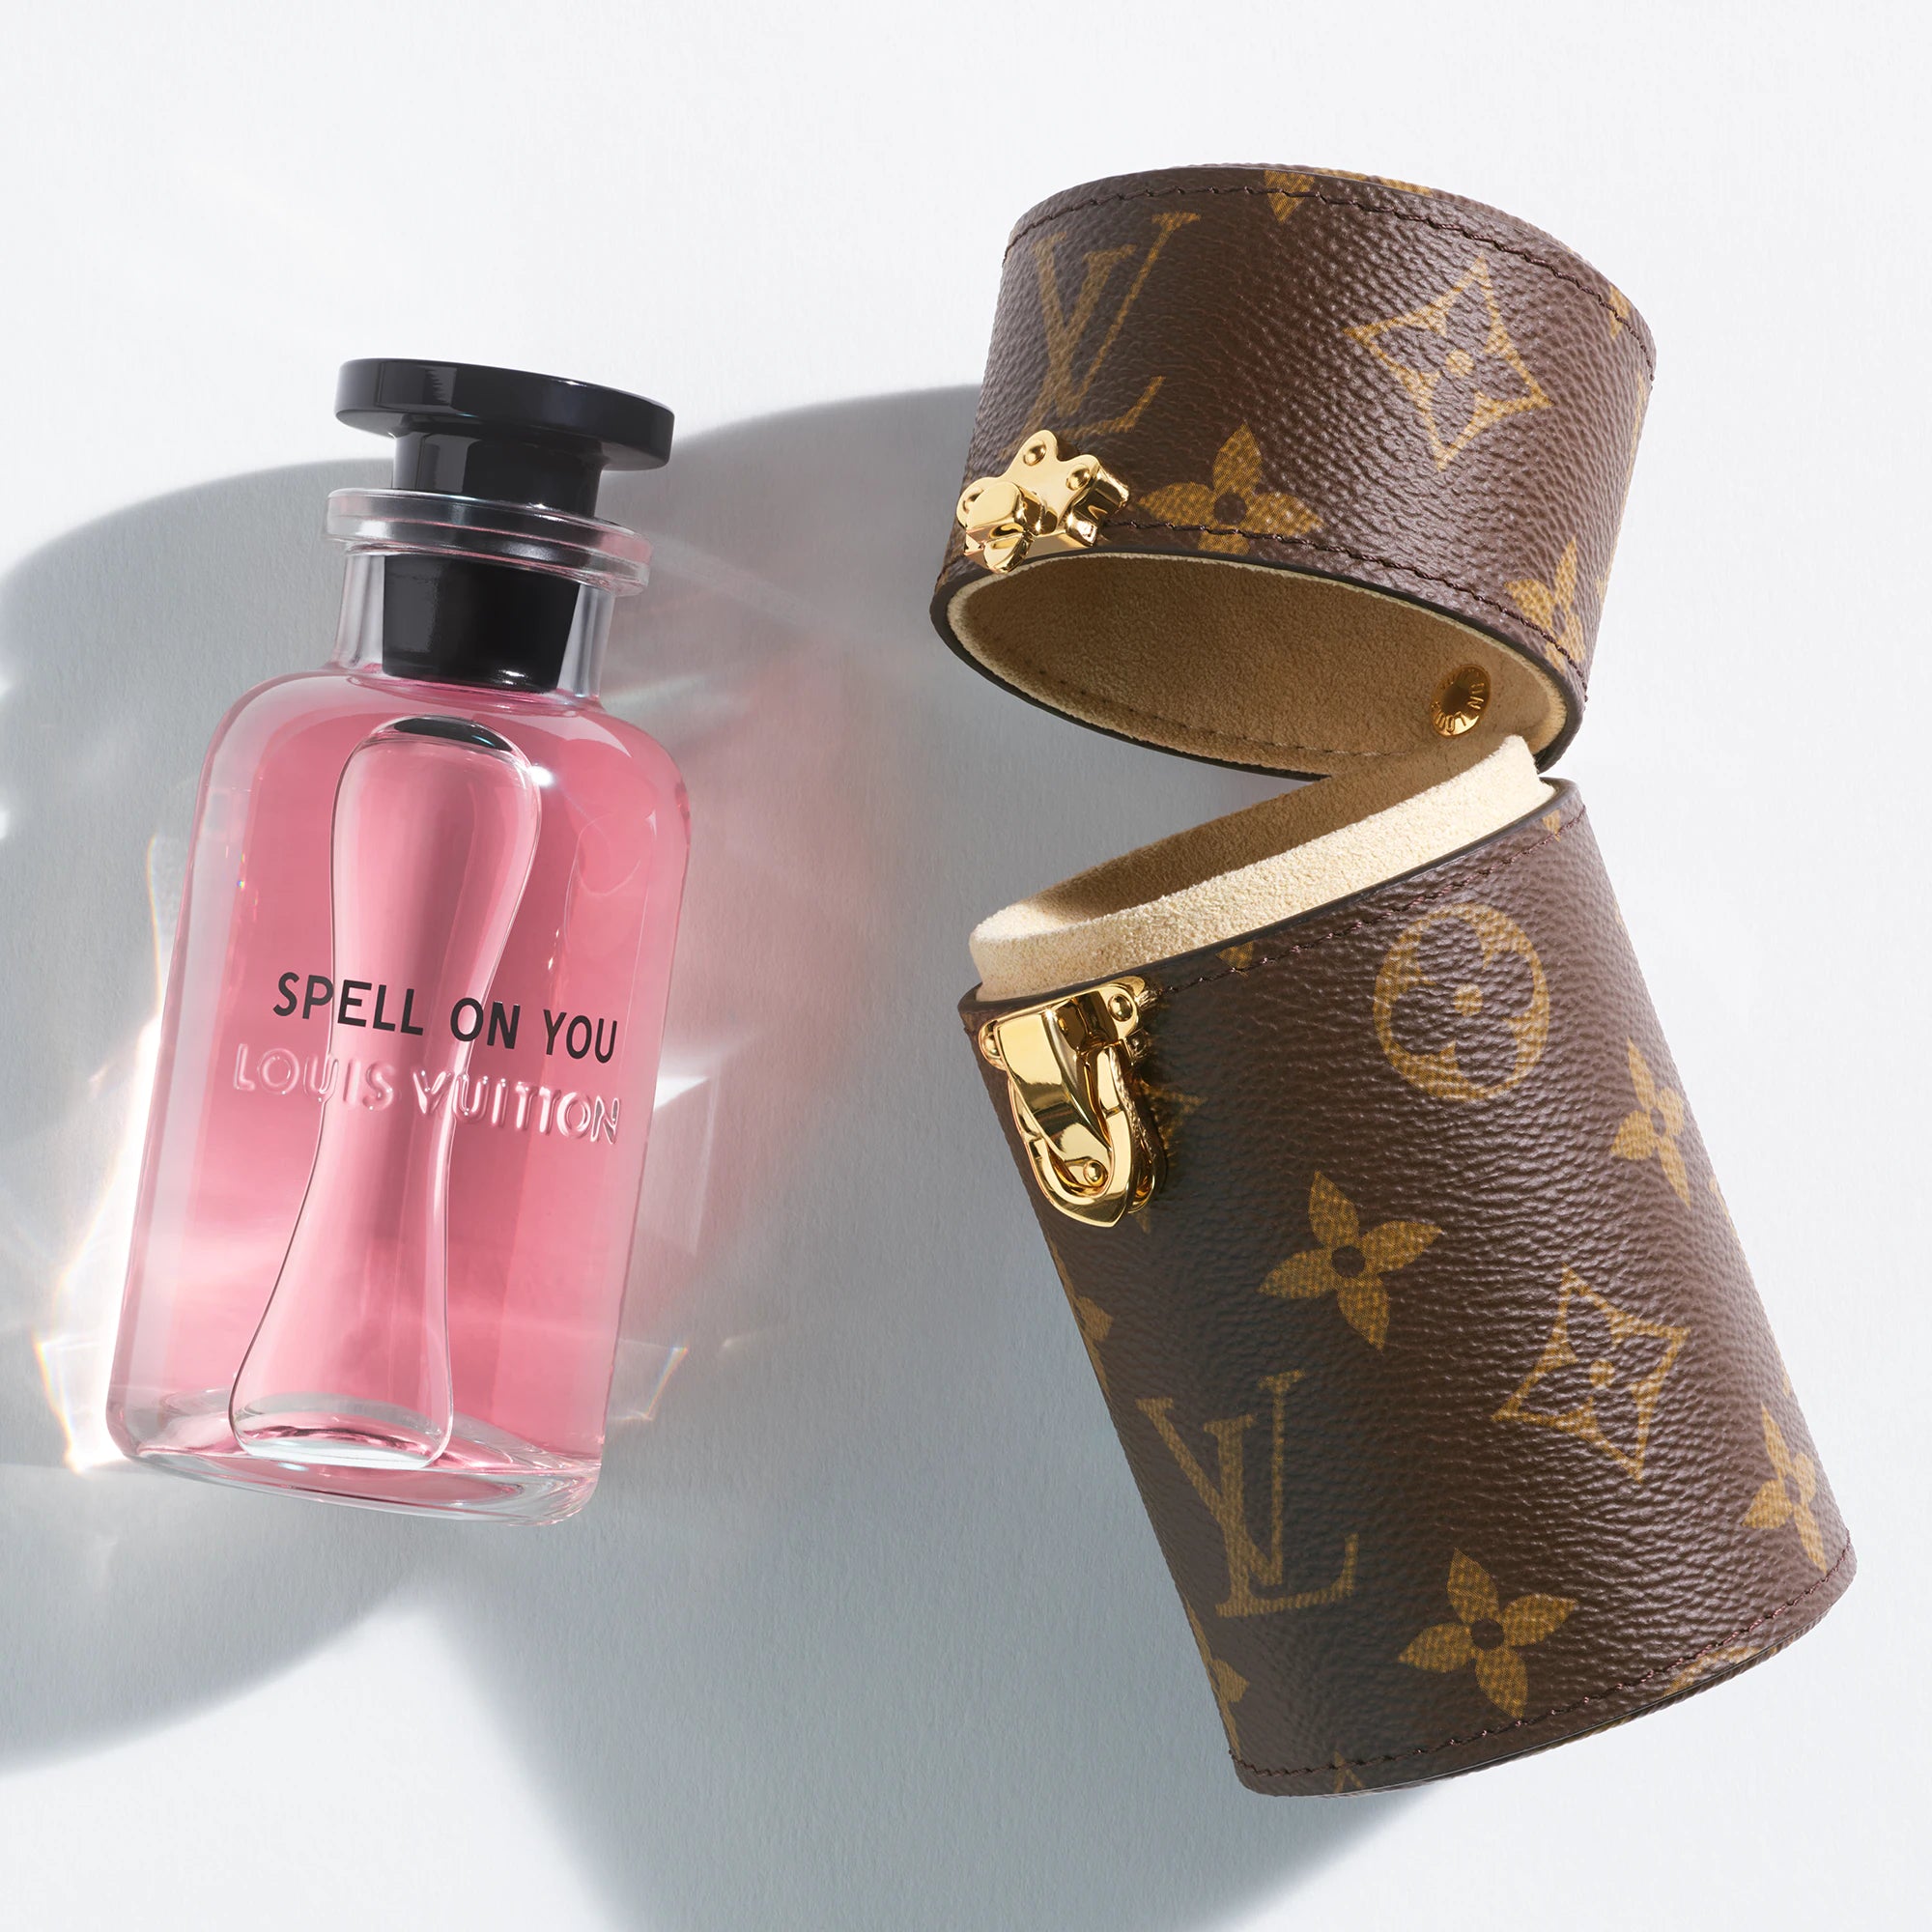 Louis Vuitton's Spell on You